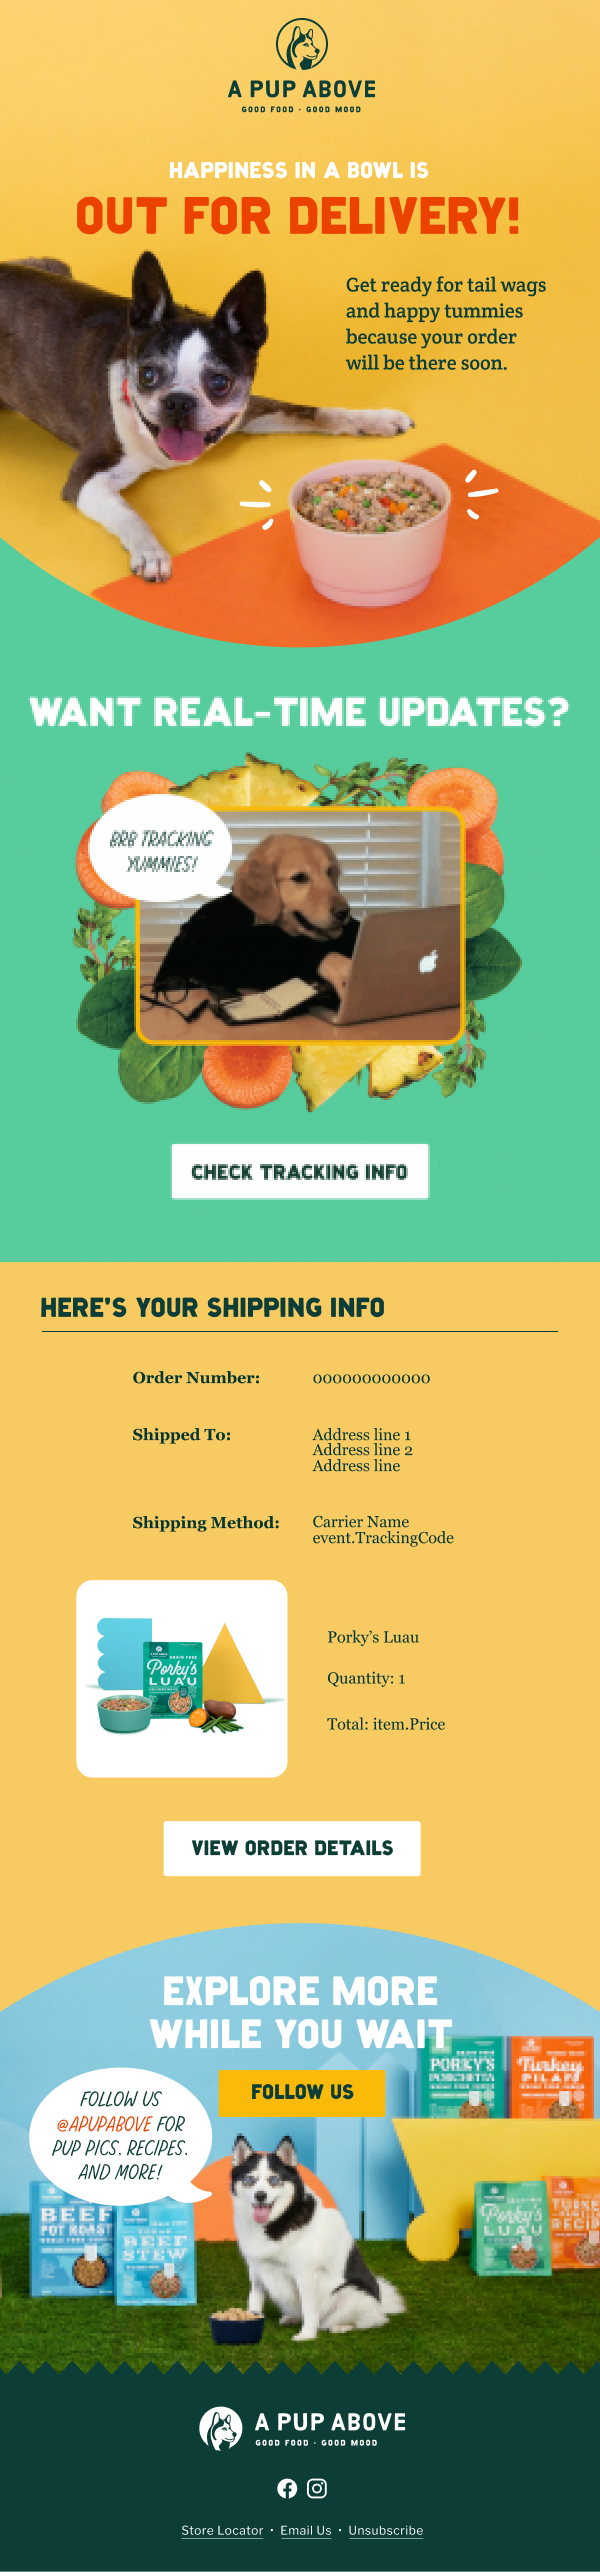 A Pup Above Out for Delivery Notification Pet Care Email Template 